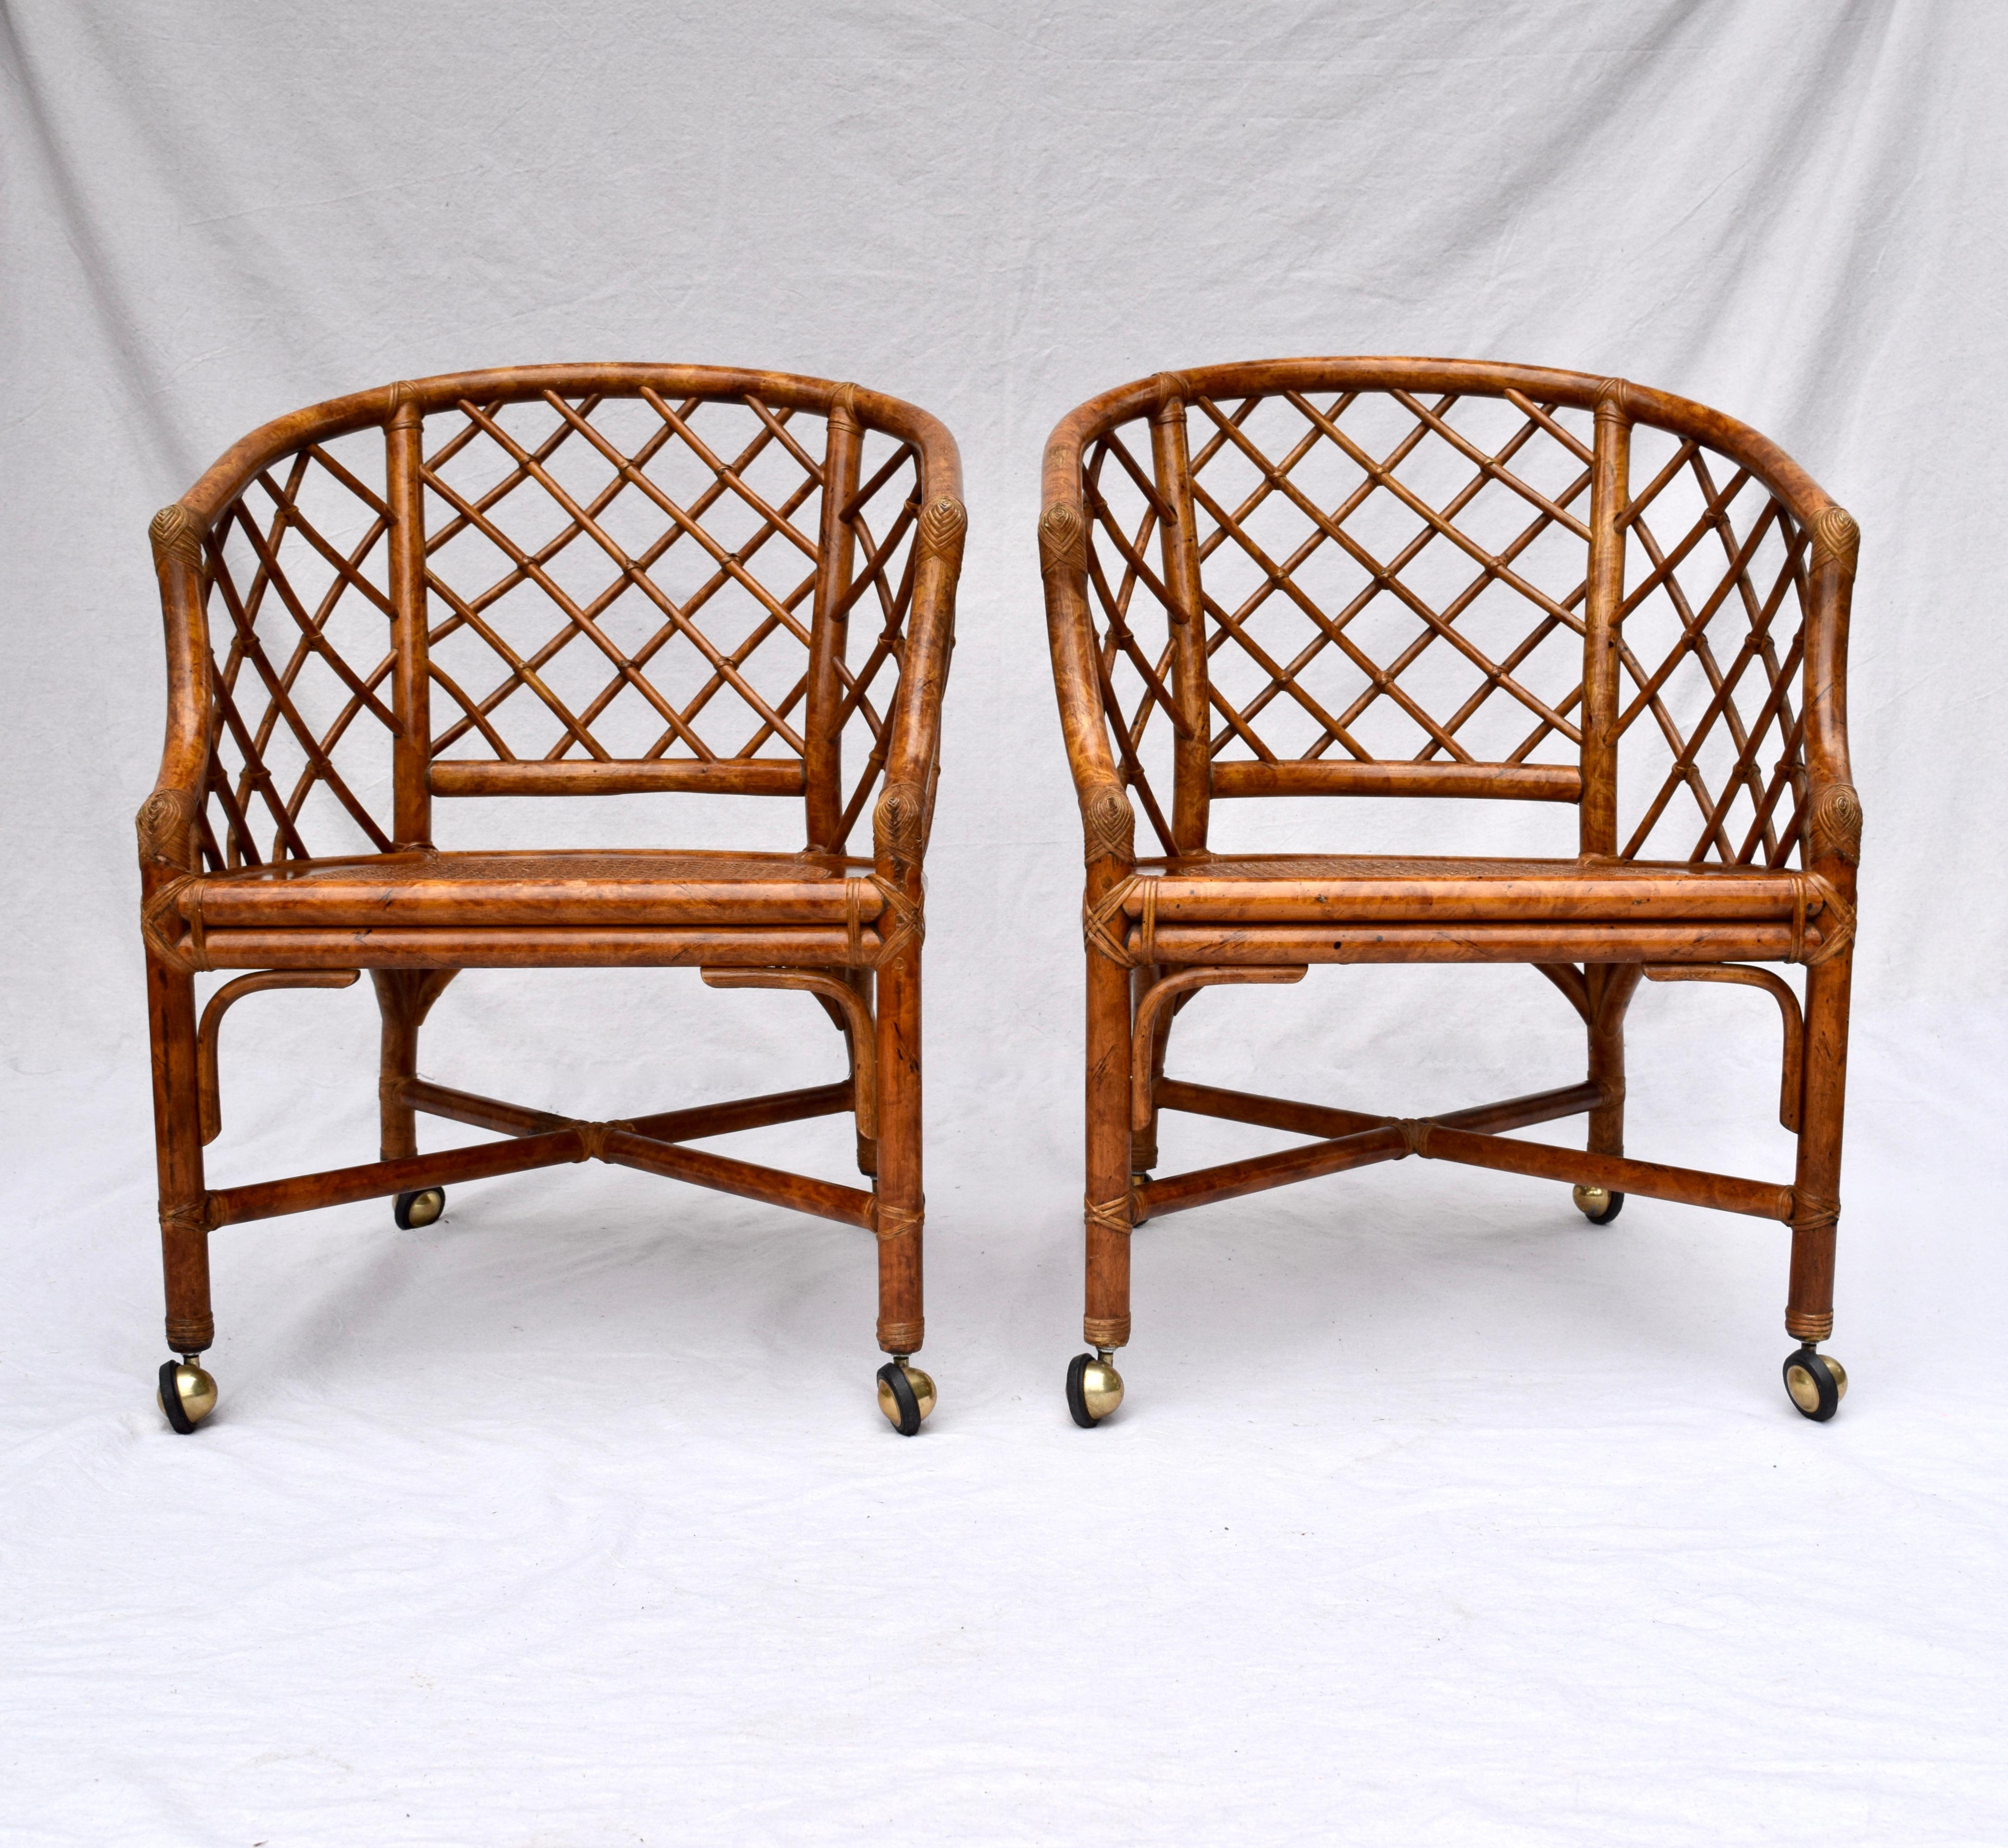 A pair of bent bamboo Chinese Chippendale barrel chairs on brass casters attributed to Ficks Reed. Lovely caned seats are enhanced with new cushions rich in indigo, persimmon and antique white tones in needlepoint tapestry textured woven upholstery.